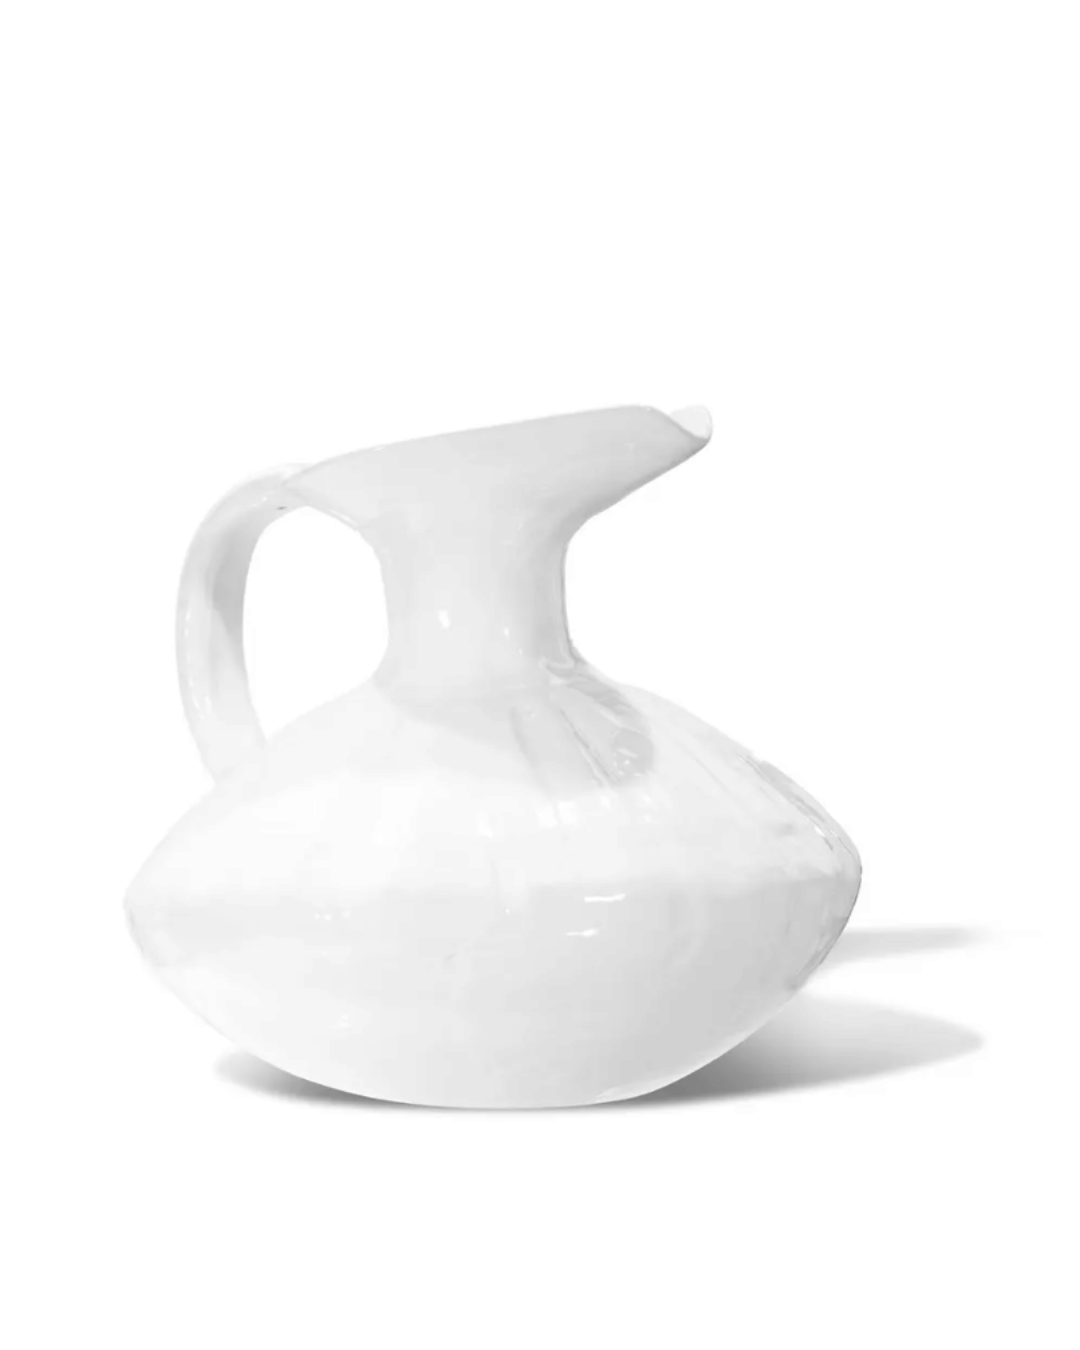 A white ceramic Pitcher No. 431 from Montes Doggett with a glossy finish, uniquely shaped with an asymmetrical, swollen body and a wide, angular handle, displayed against a clean, white background in a Scottsdale Arizona bungalow.